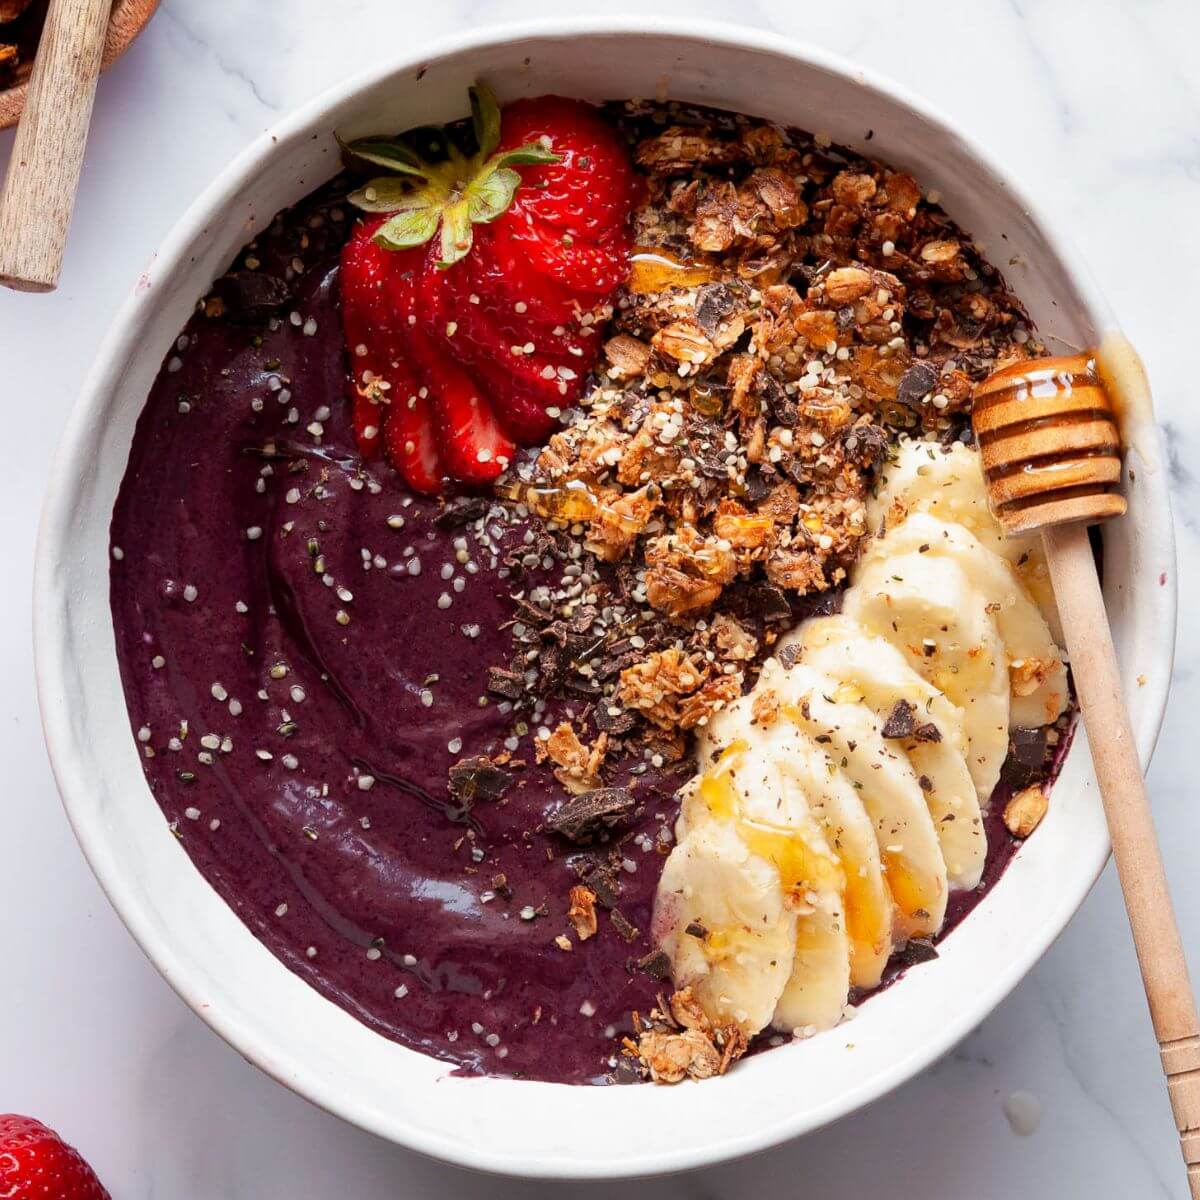 8-facts-about-national-acai-bowl-day-april-6th